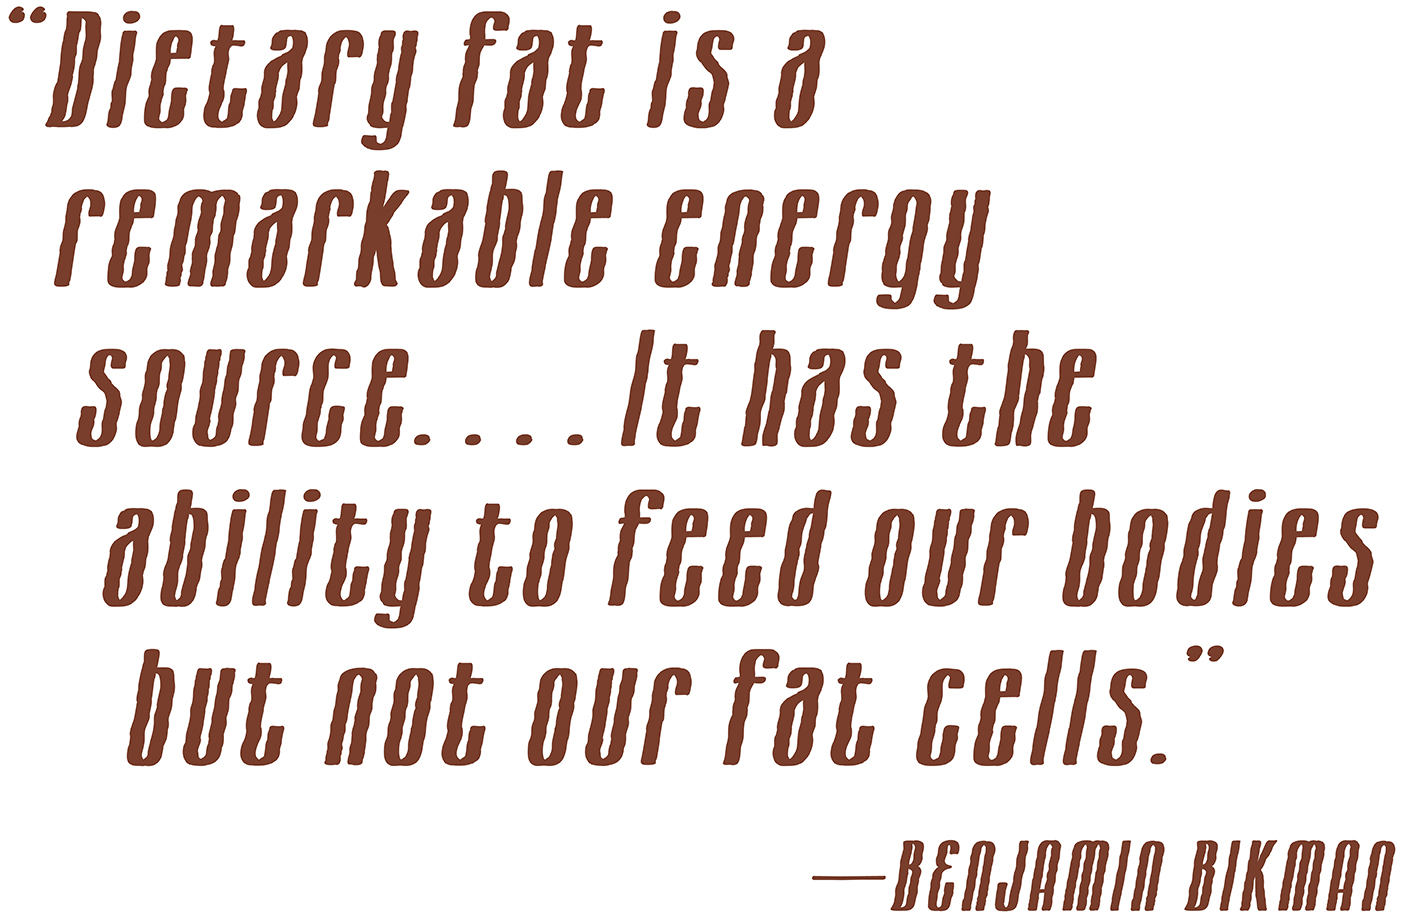 Designed quote: "Dietary fat is a remarkable energy source. . . It has the ability to feed our bodies but not our fat cells."